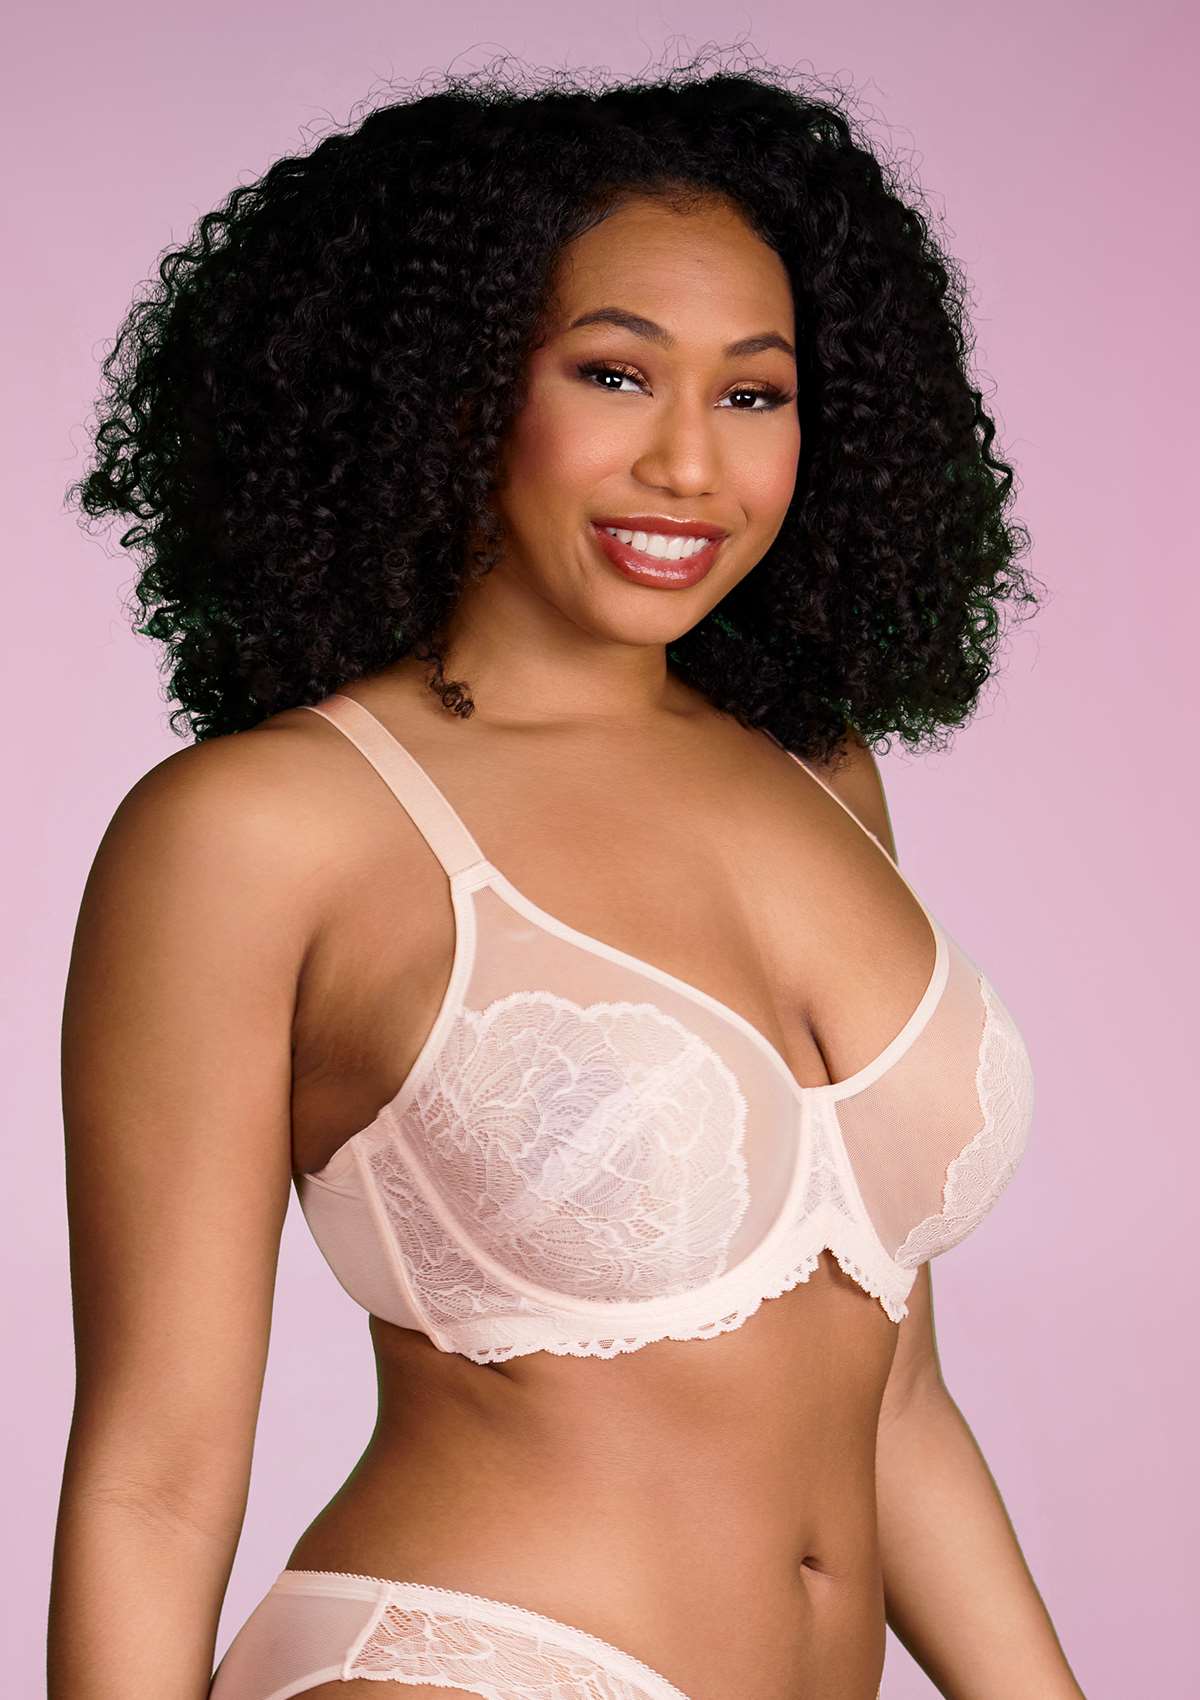 HSIA Blossom Sheer Lace Bra: Comfortable Underwire Bra For Big Busts - Dusty Peach / 38 / G